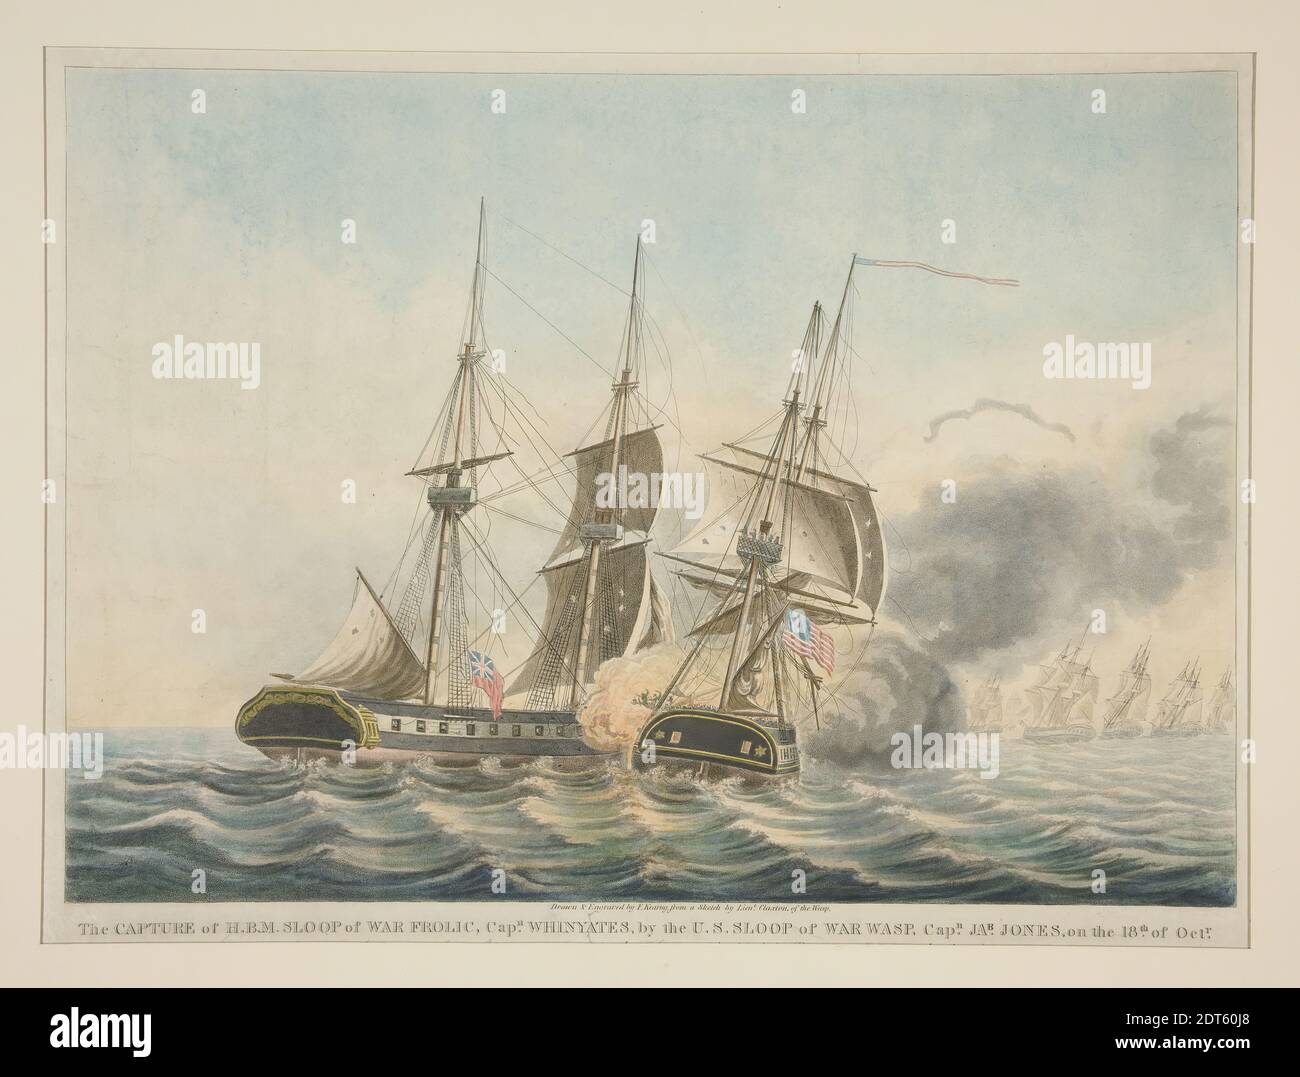 Artist: F. Kearney, After: Lt. Claxton, American, 1813–1881, The Capture of H. B. M. Sloop of War Frolic (by the Wasp), Aquatint, colored by hand, sheet: 36 × 55 cm (14 3/16 × 21 5/8 in.), Made in United States, American, 19th century, Works on Paper - Prints Stock Photo